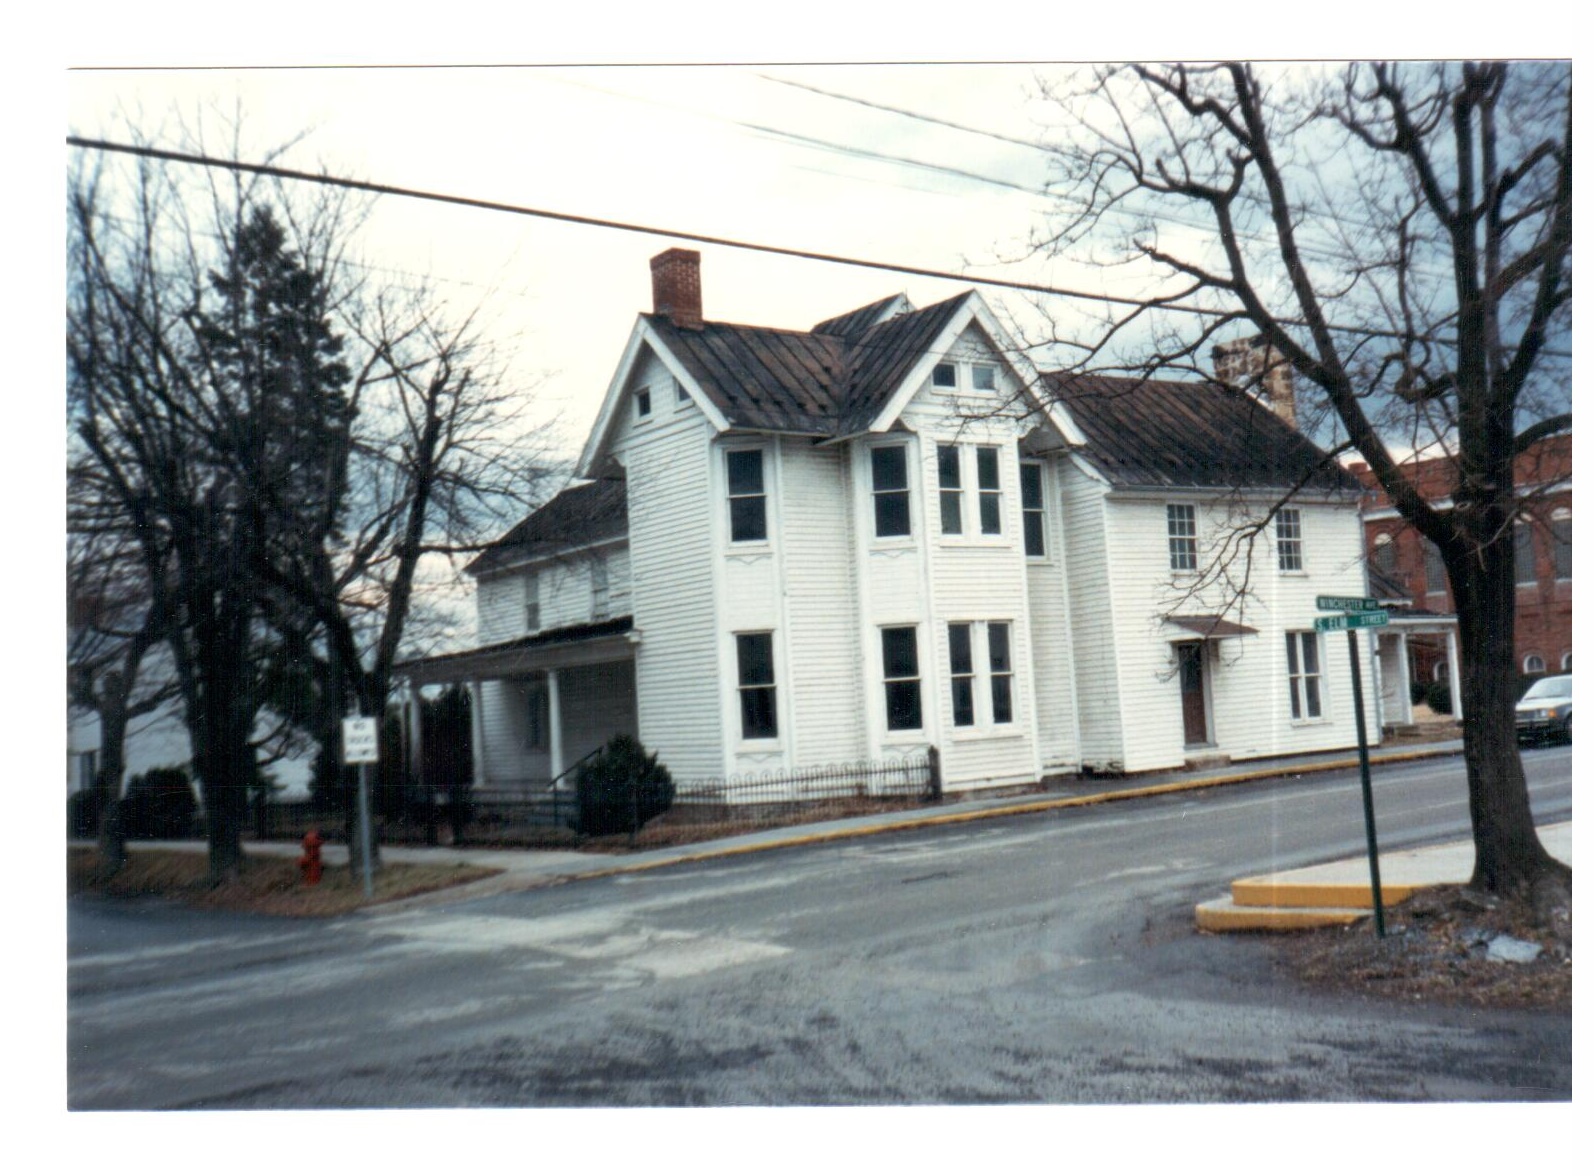 Higgins House (far left) as part of larger structure, c. late 980's